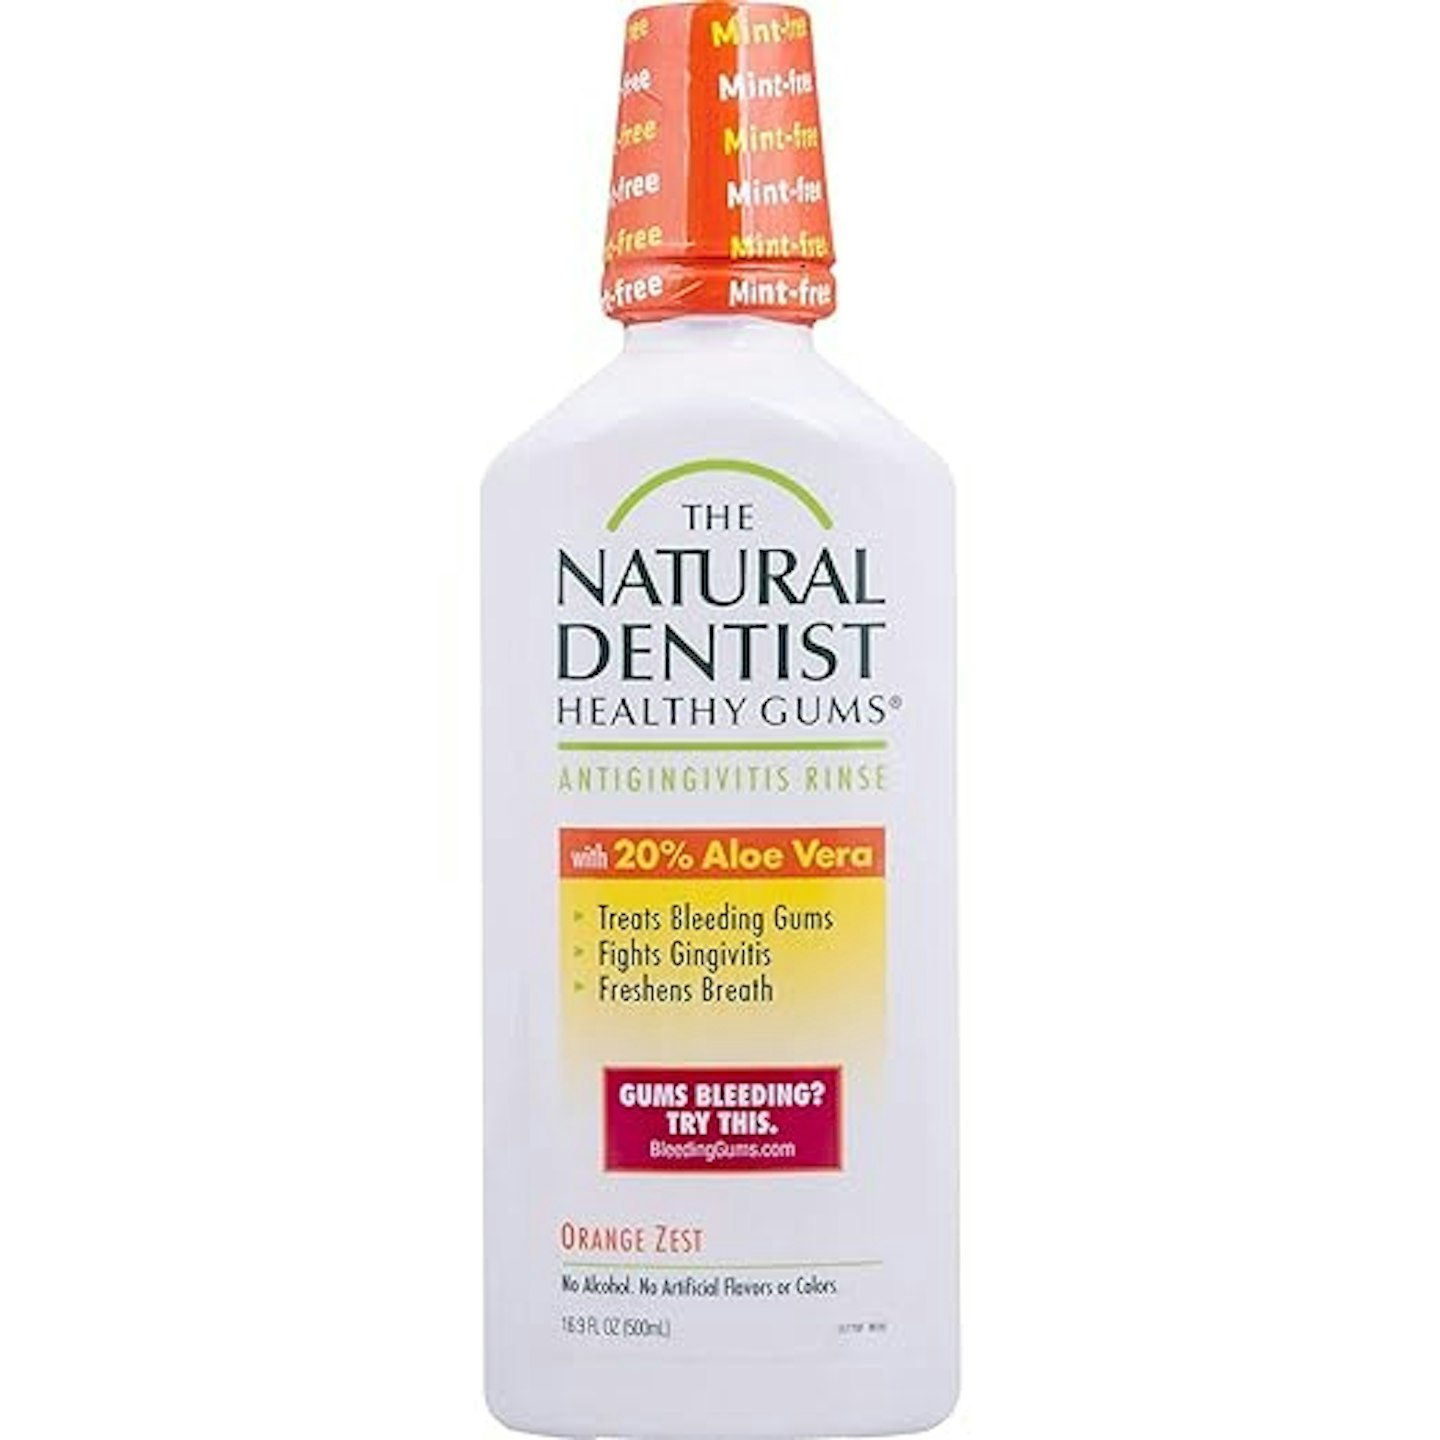 The Natural Dentist Healthy Gums Mouth Wash, £15